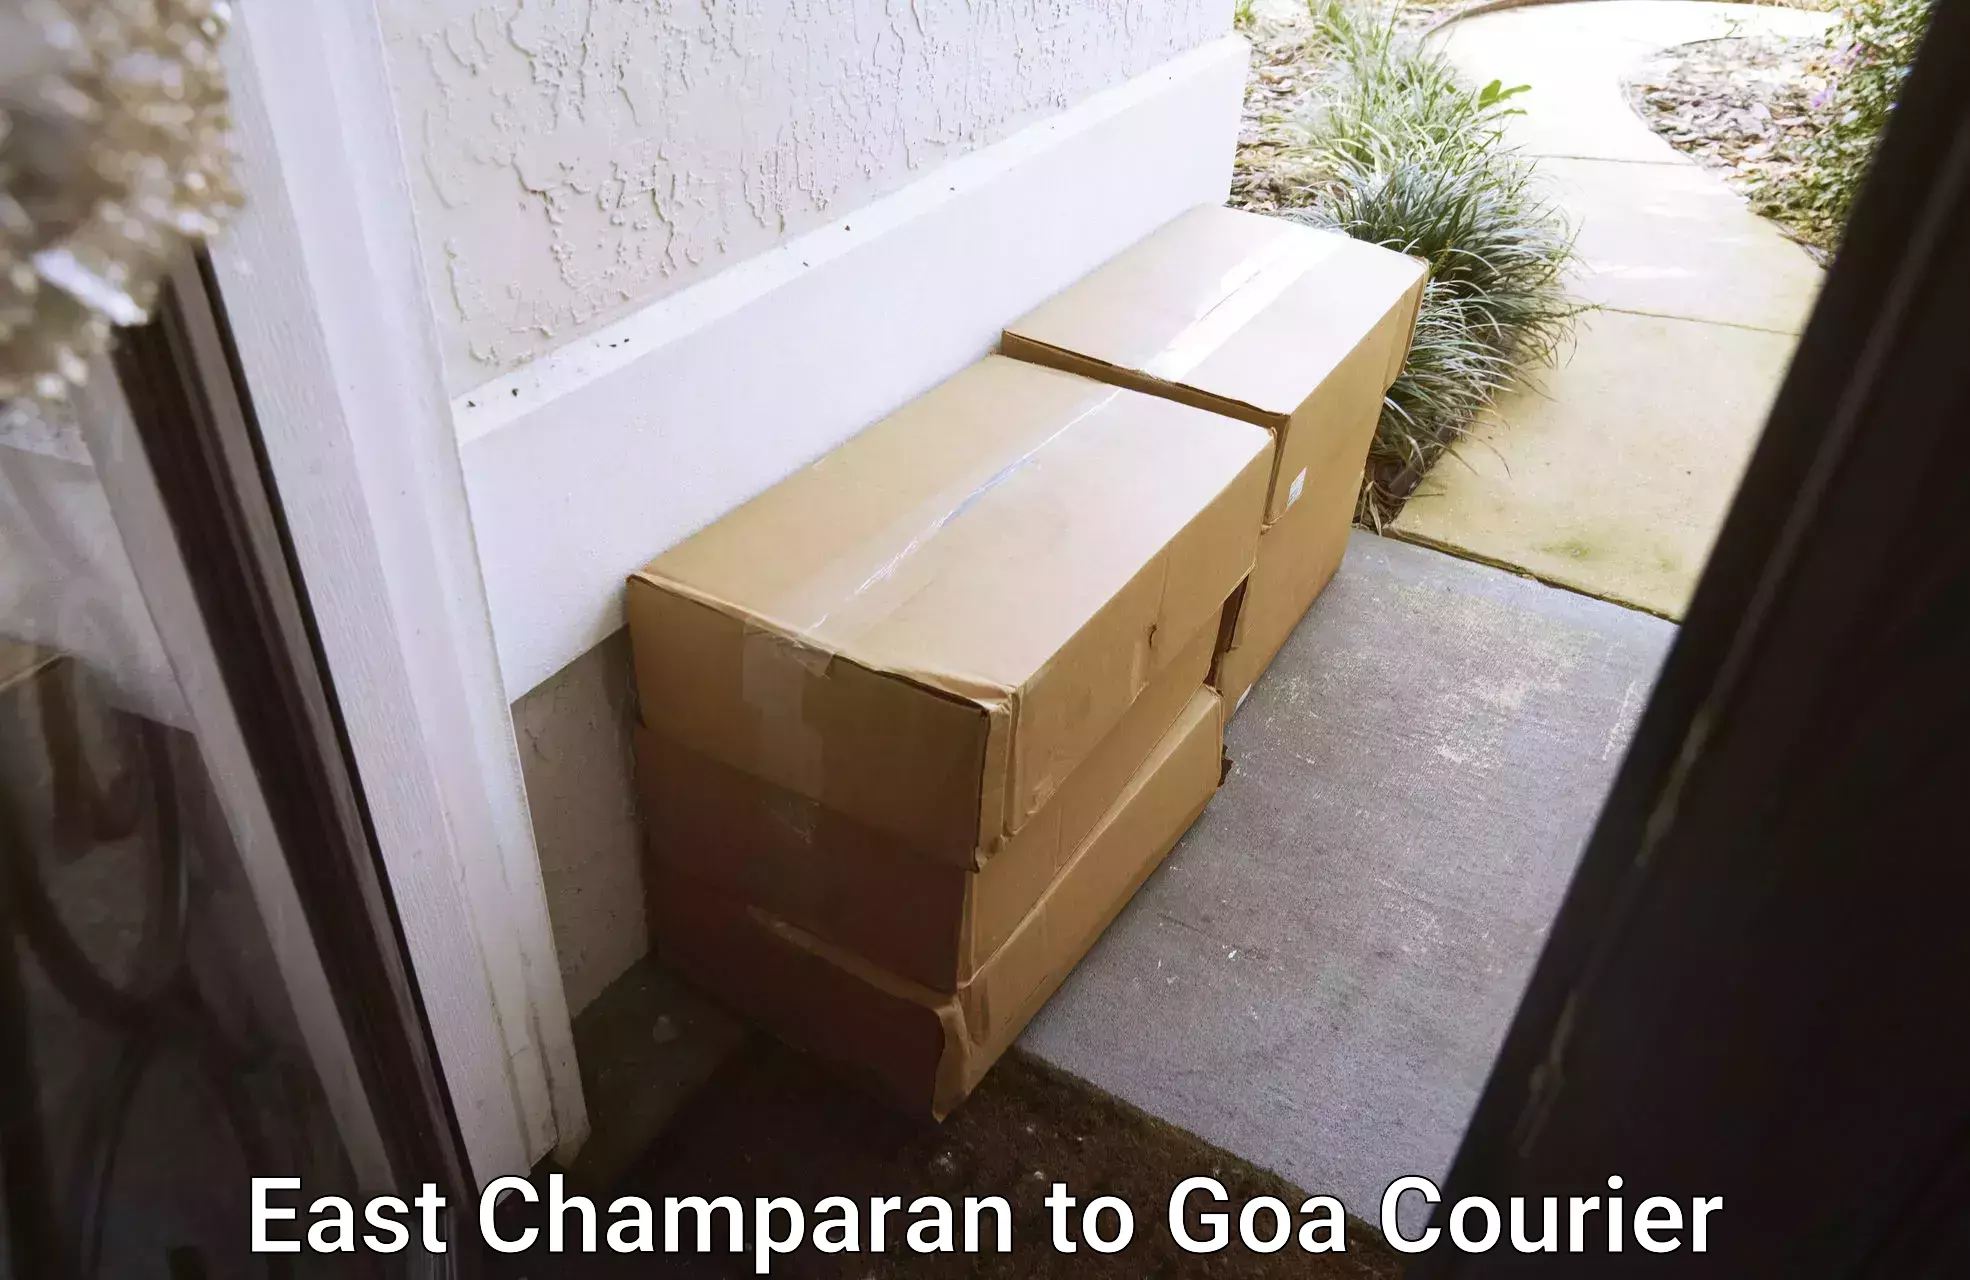 Furniture transport company East Champaran to South Goa